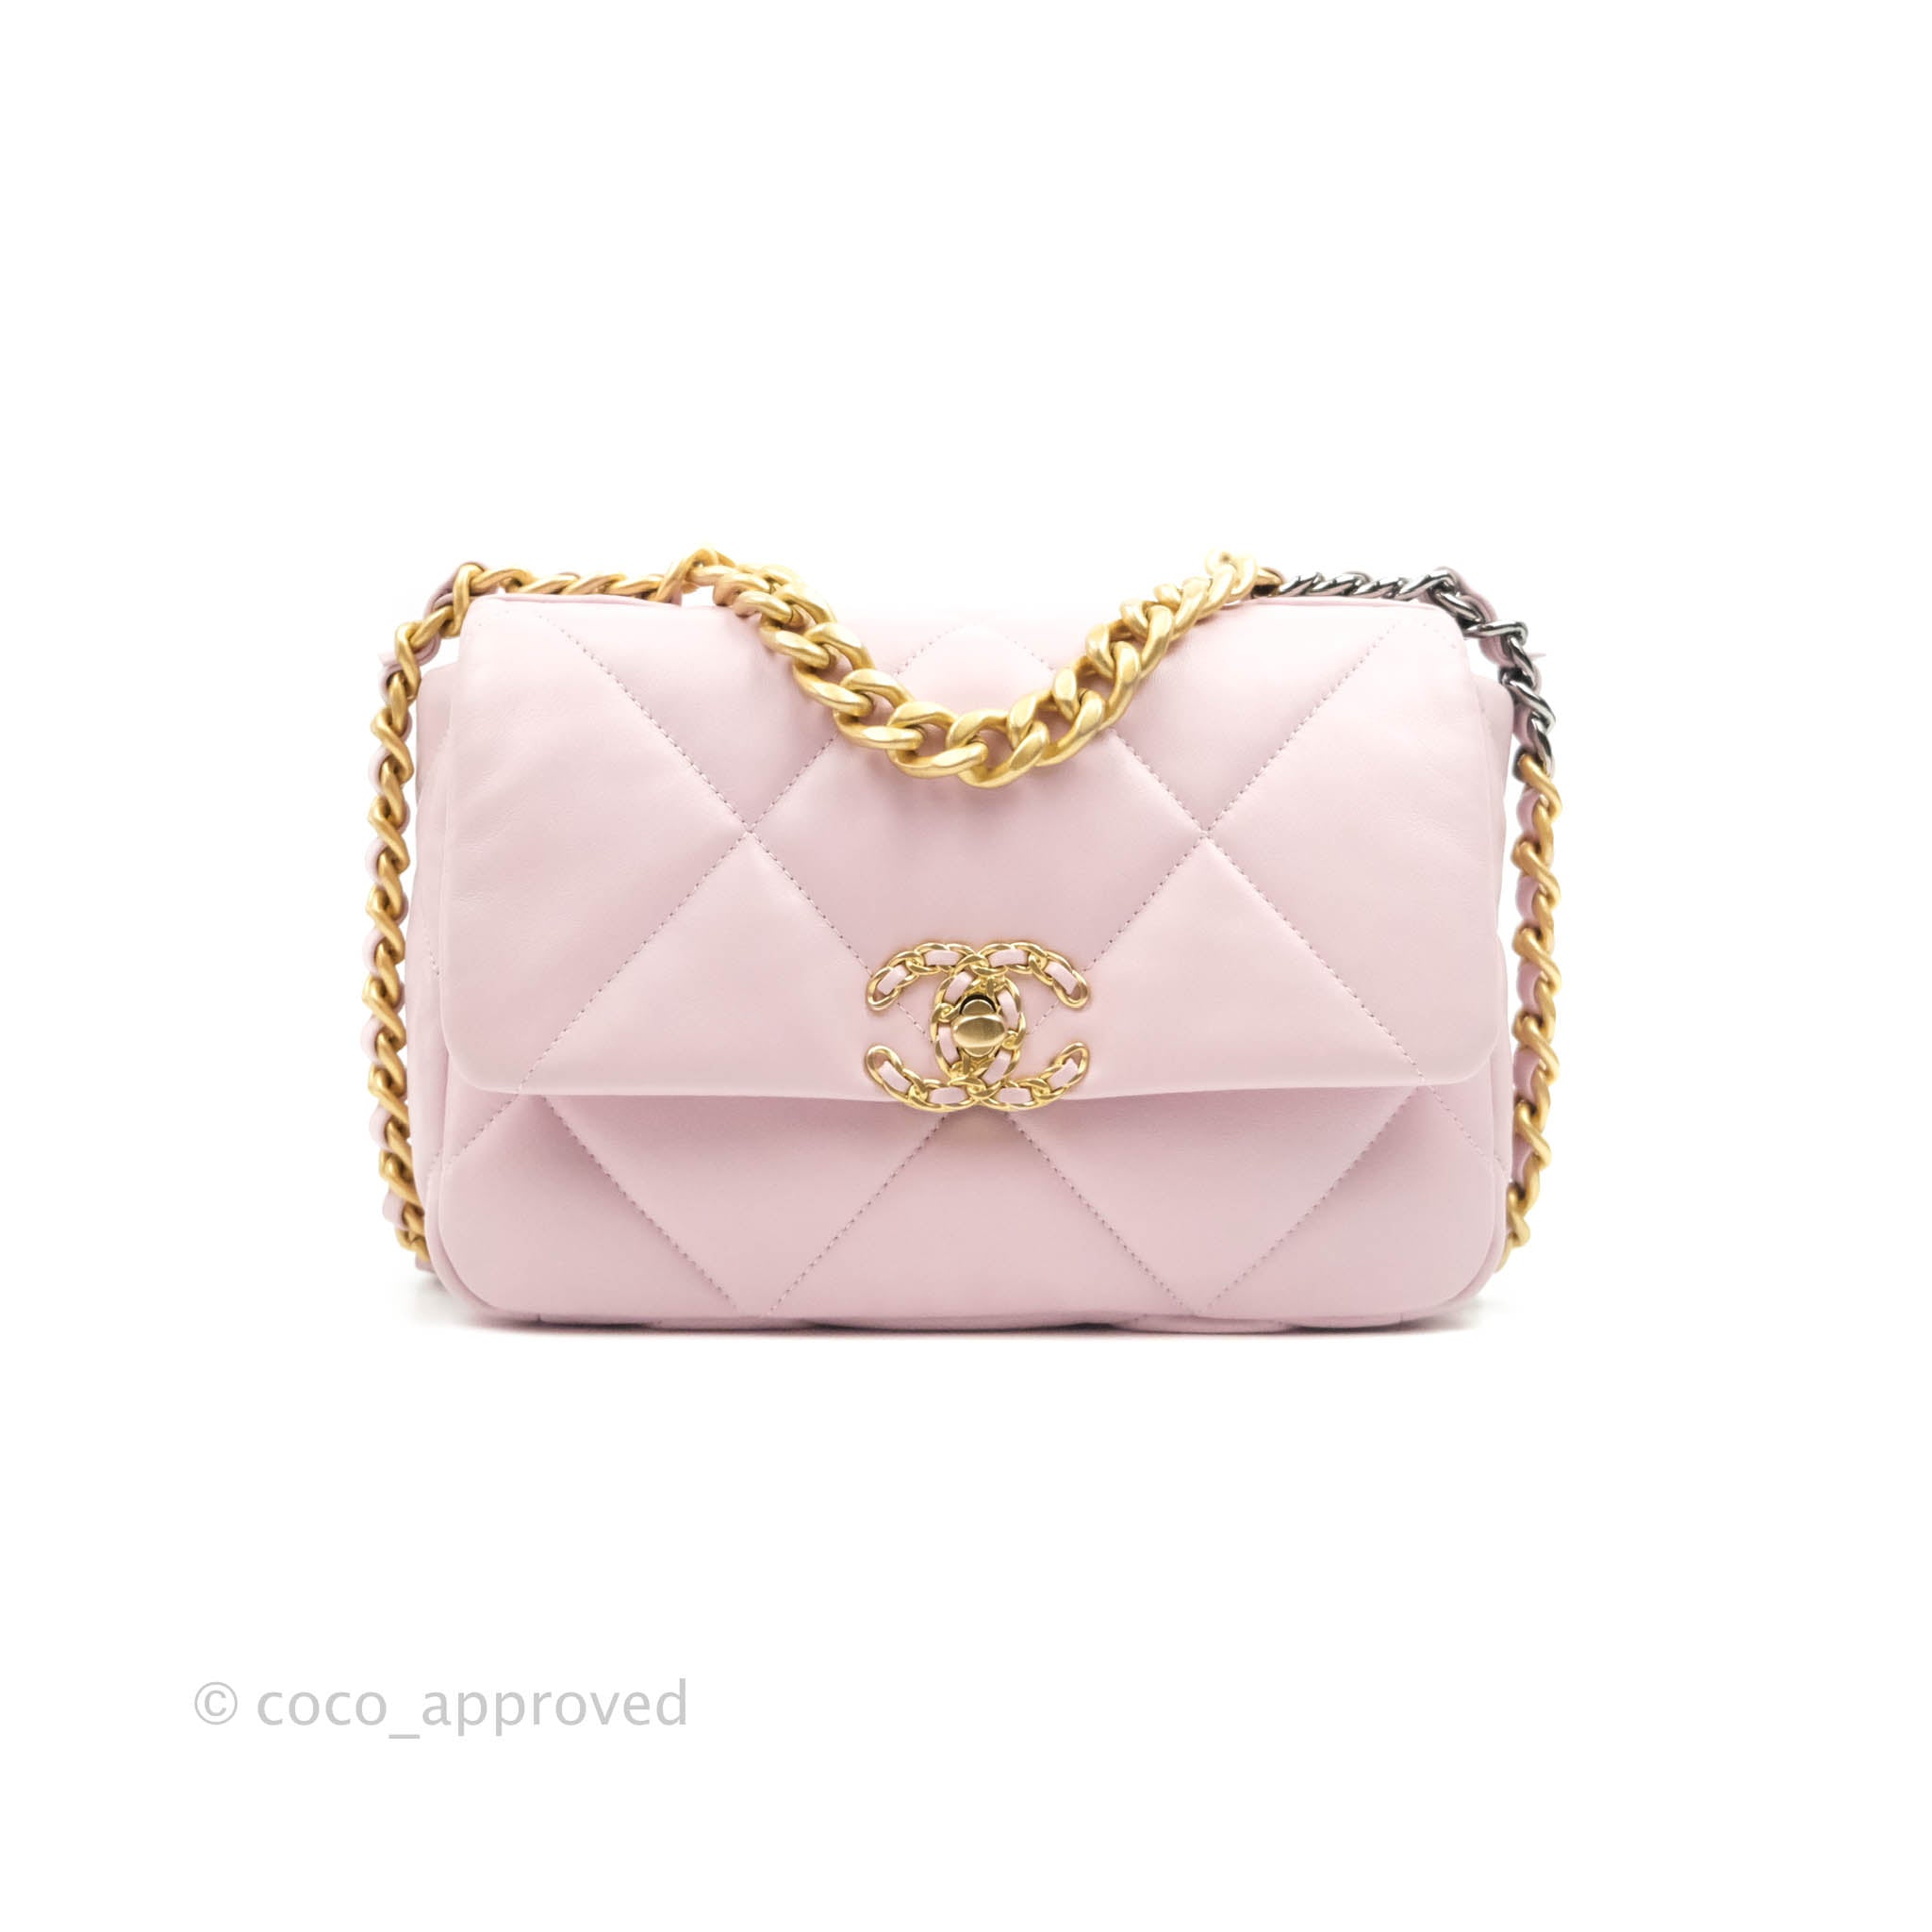 chanel 19 small pink